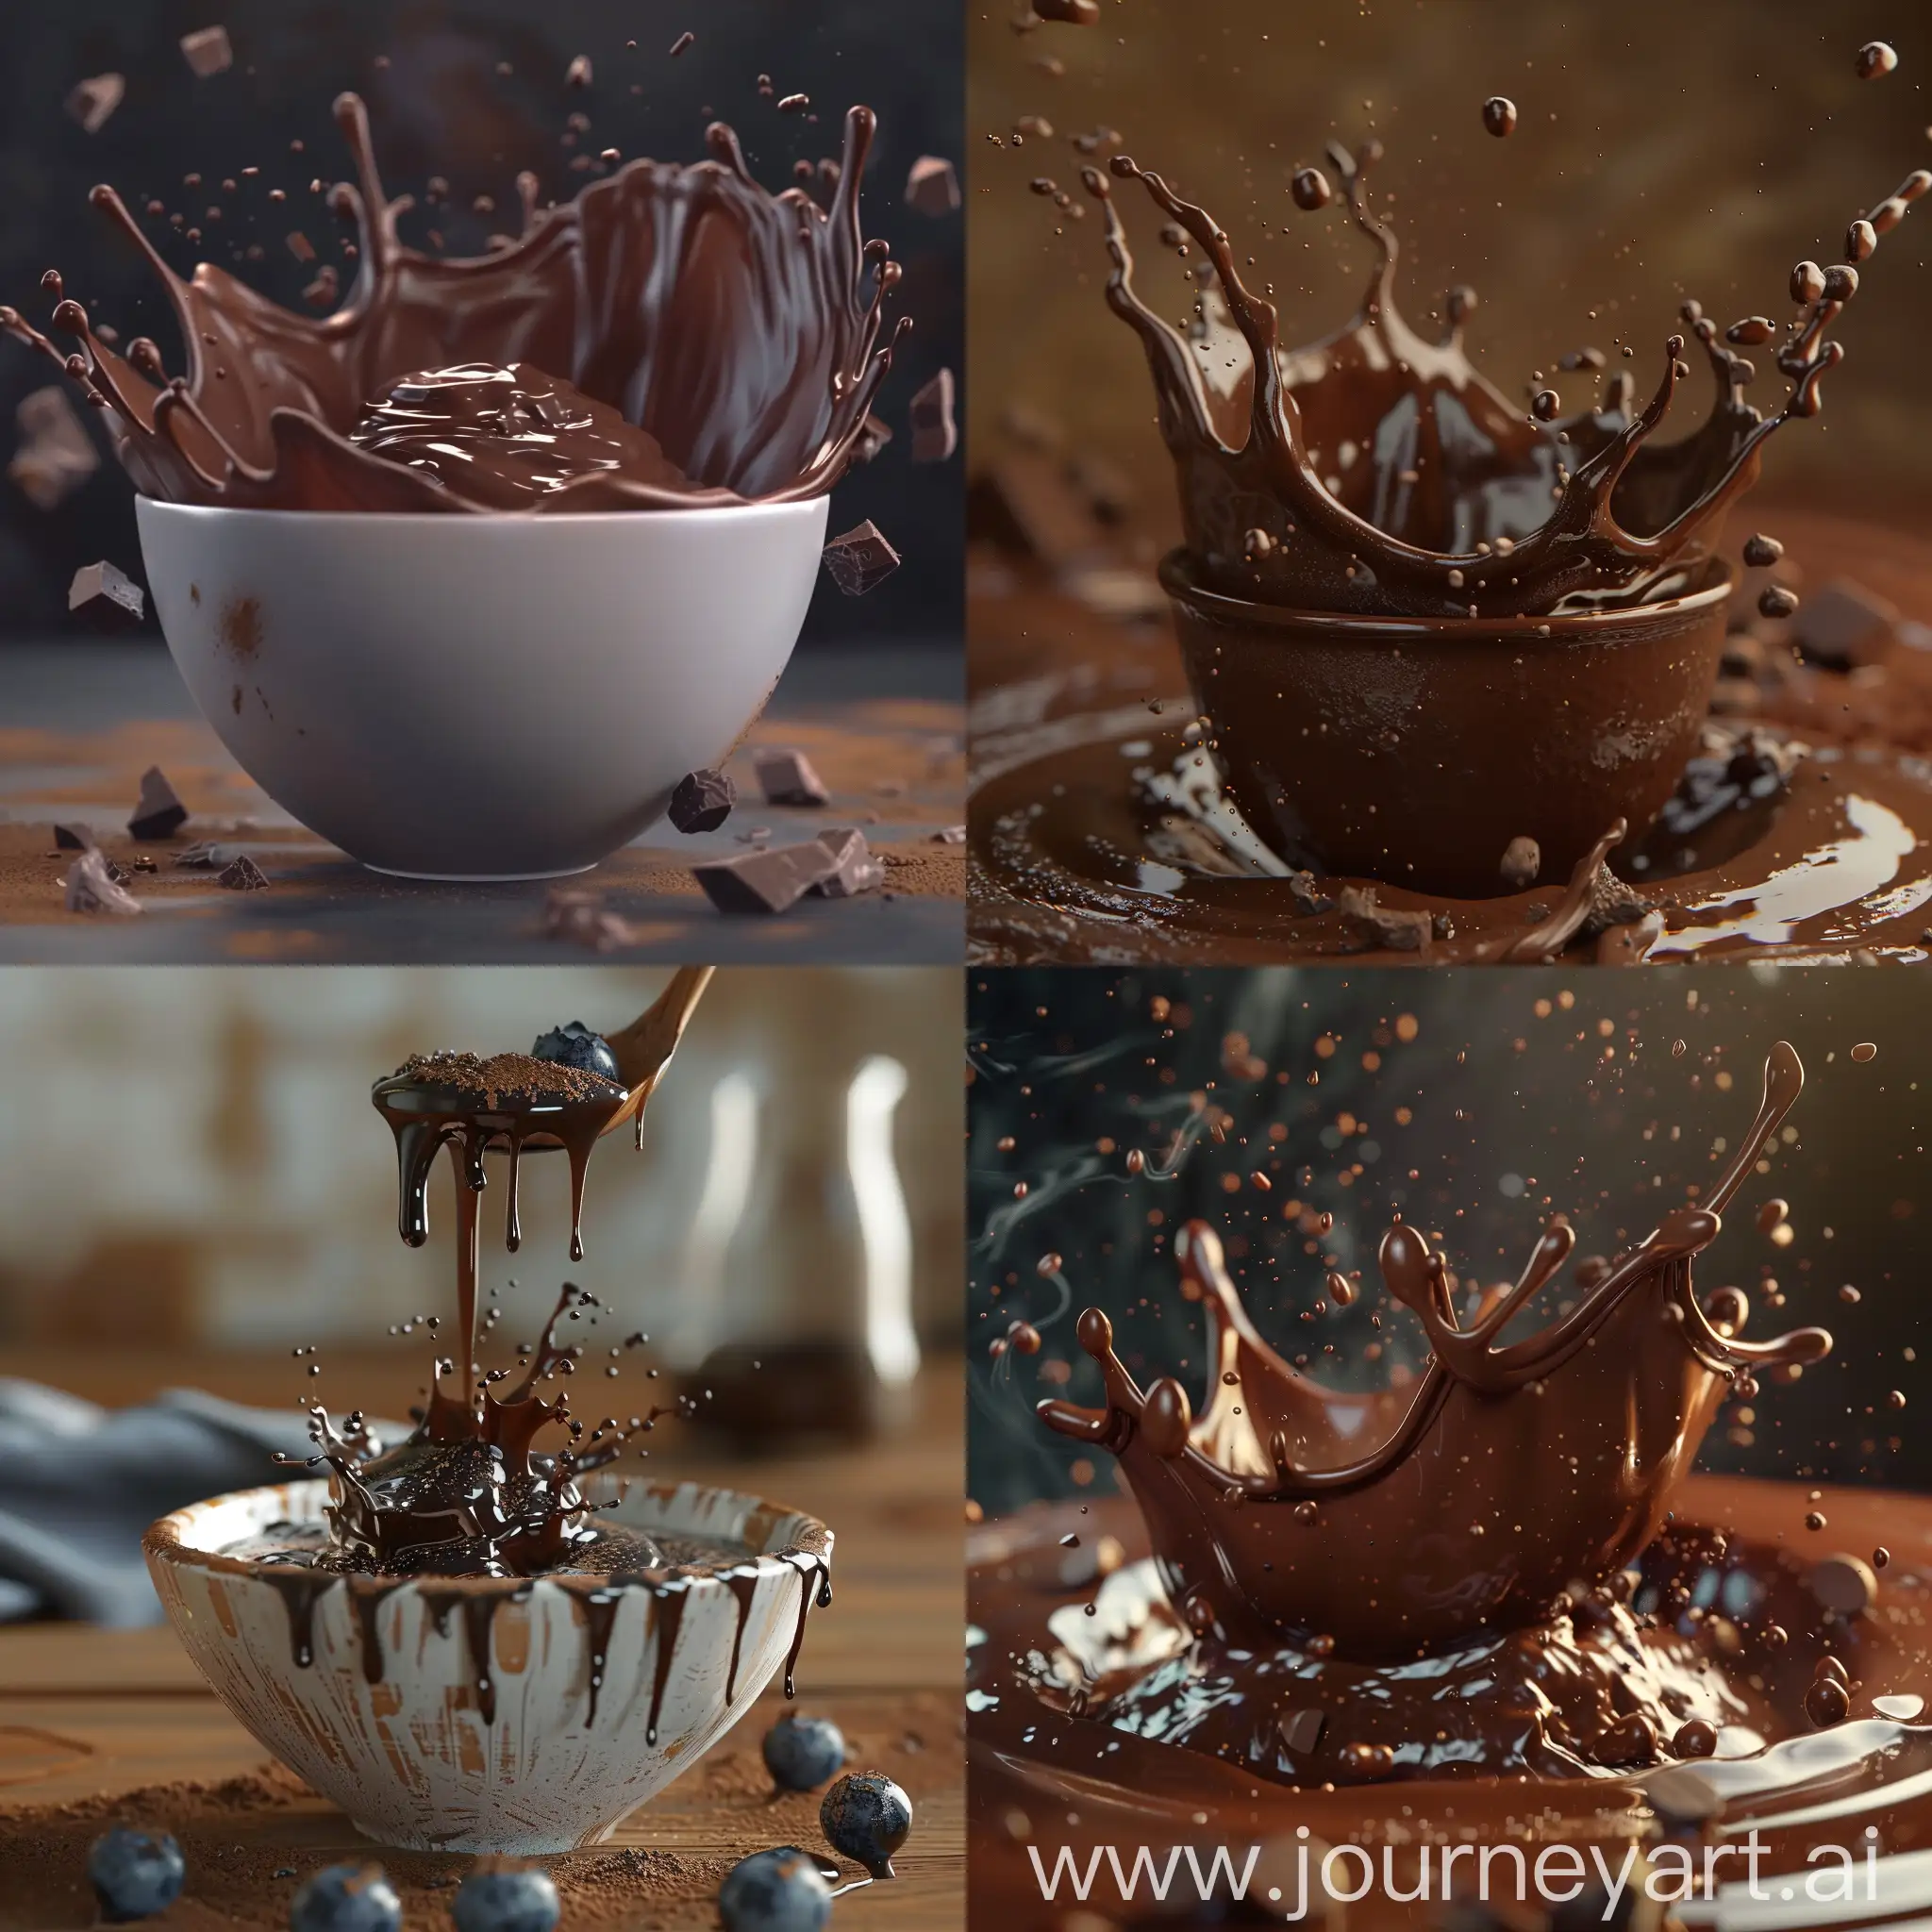 Delicious-Chocolate-Pudding-Dessert-in-Vibrant-3D-Animation